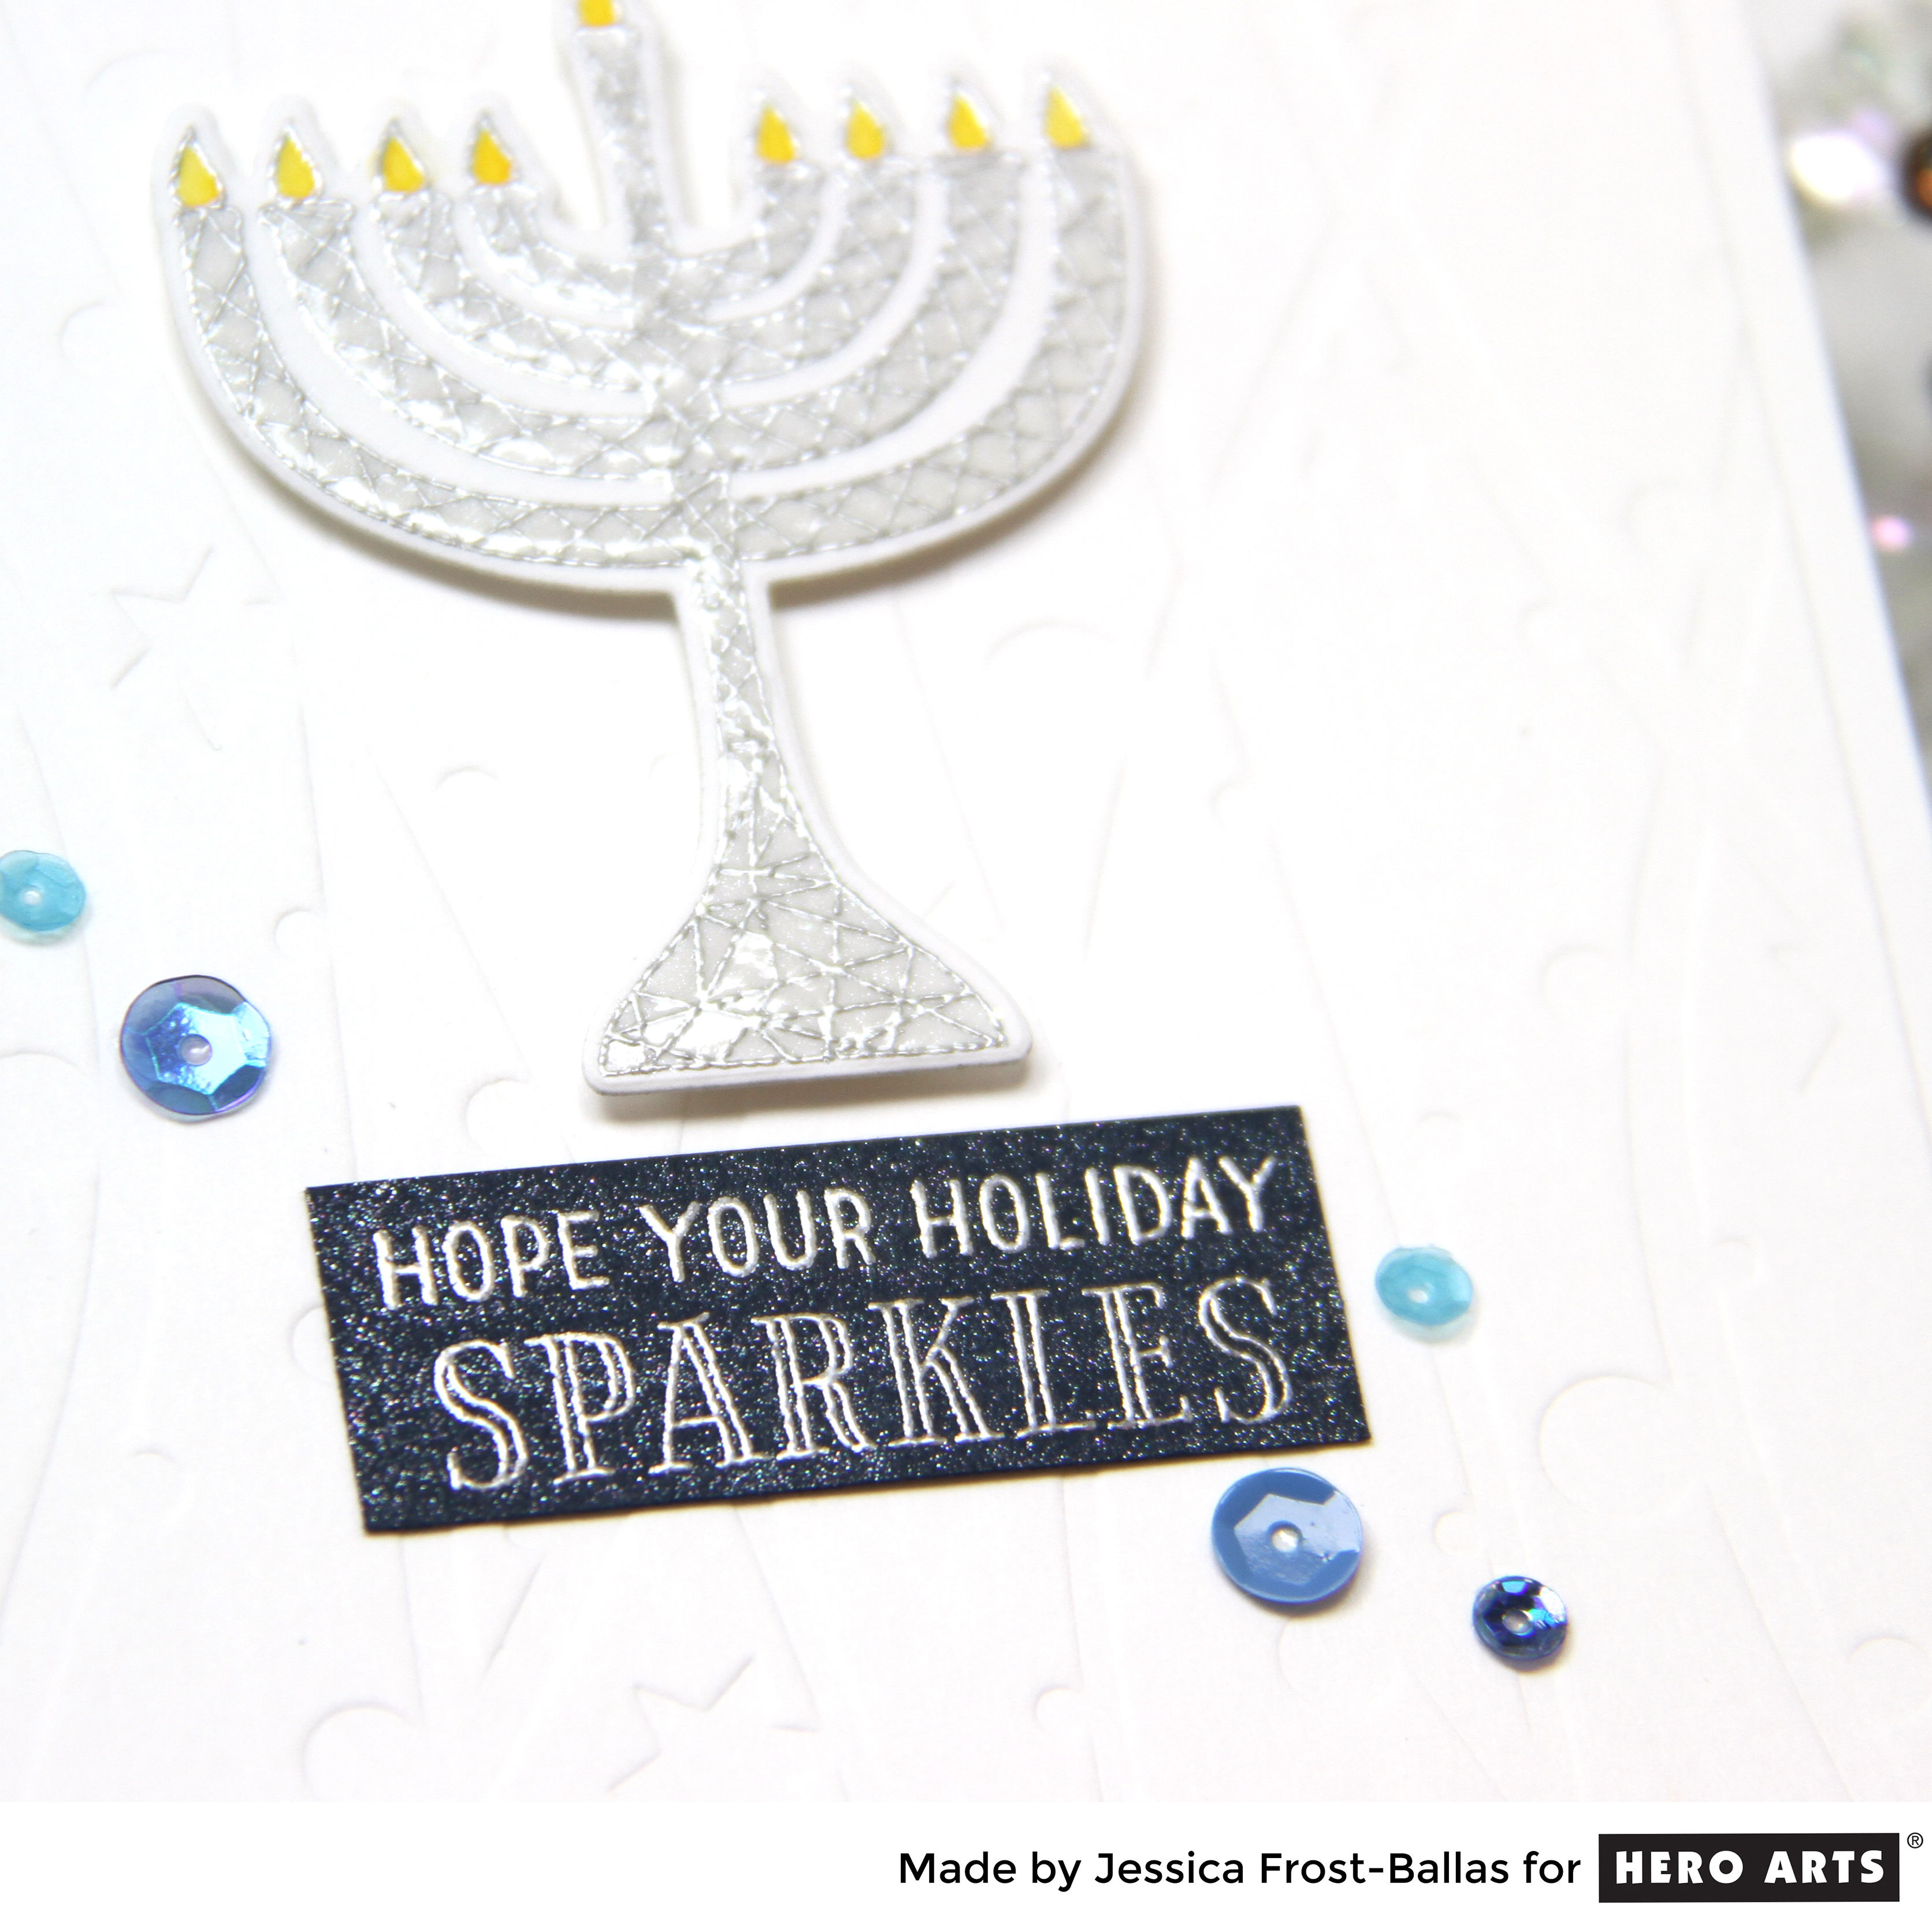 Hope Your Holiday Sparkles by Jessica Frost-Ballas for Hero Arts